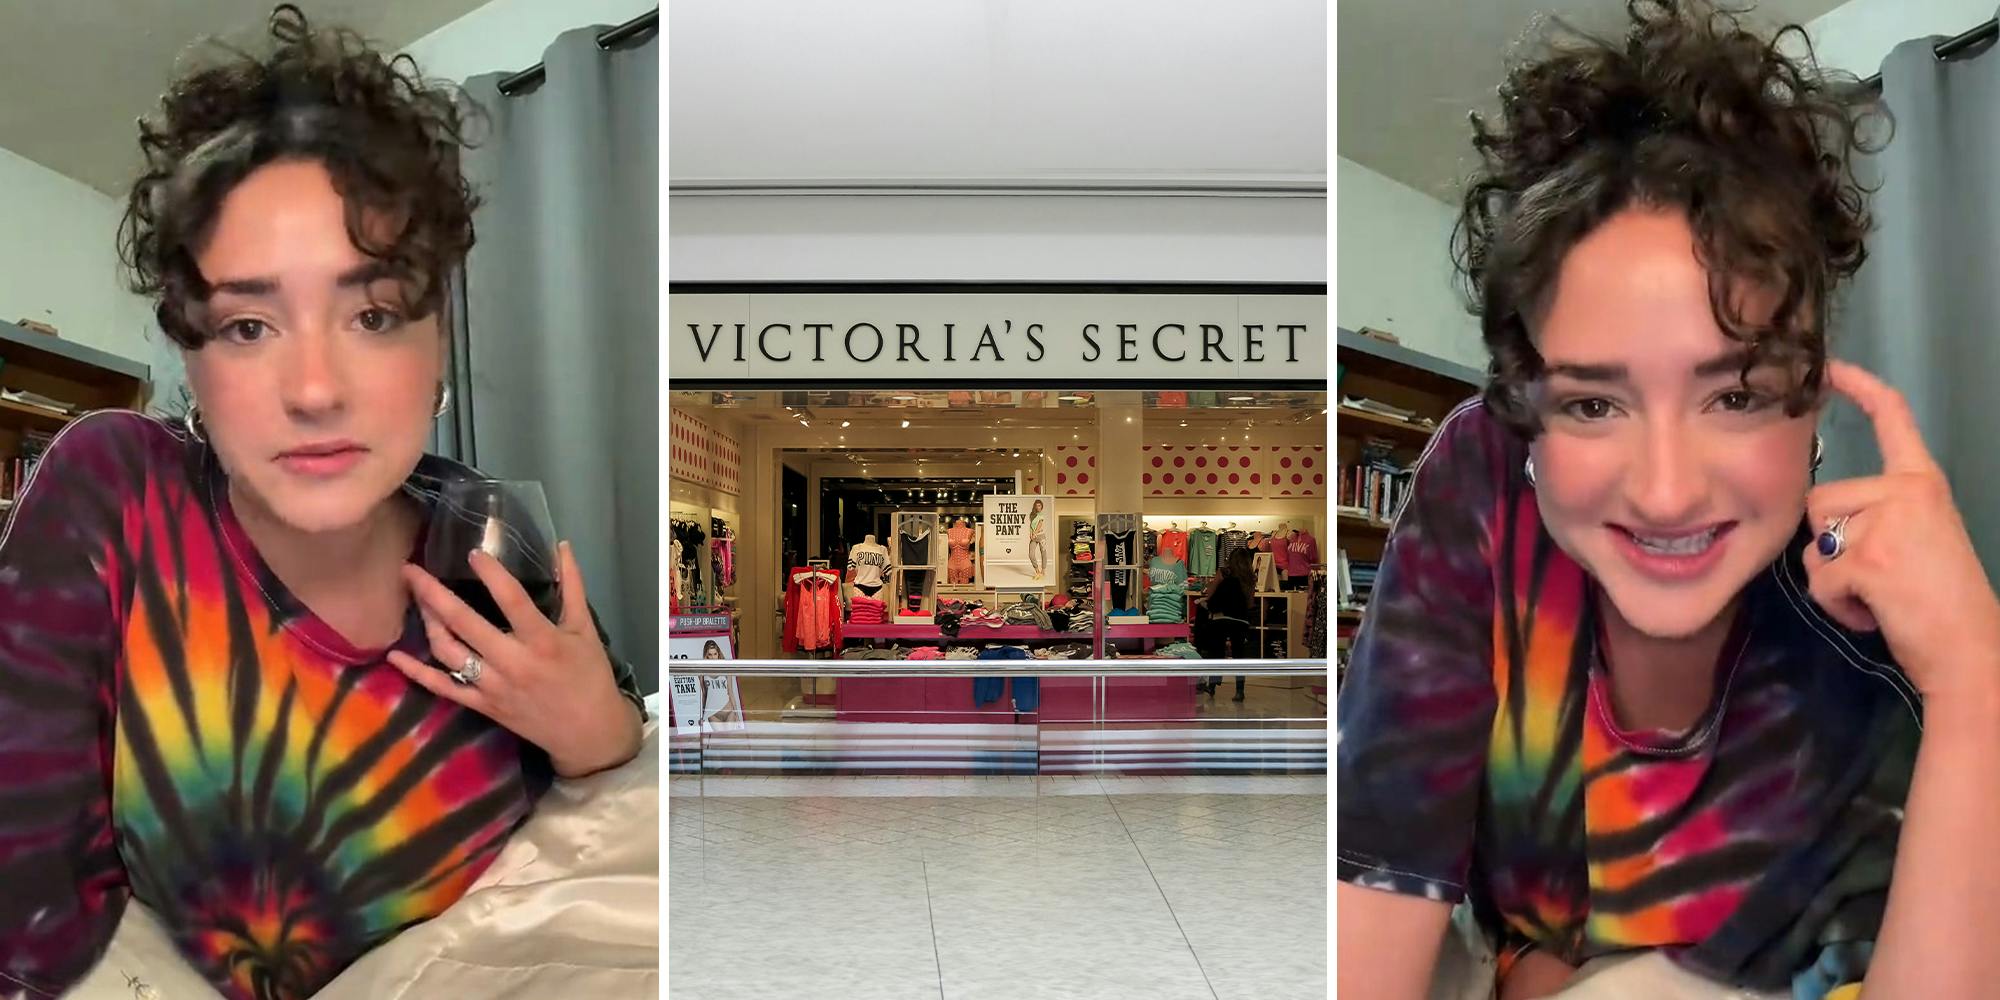 Victoria’s Secret worker says she got fired for dumpster diving and selling the products on eBay